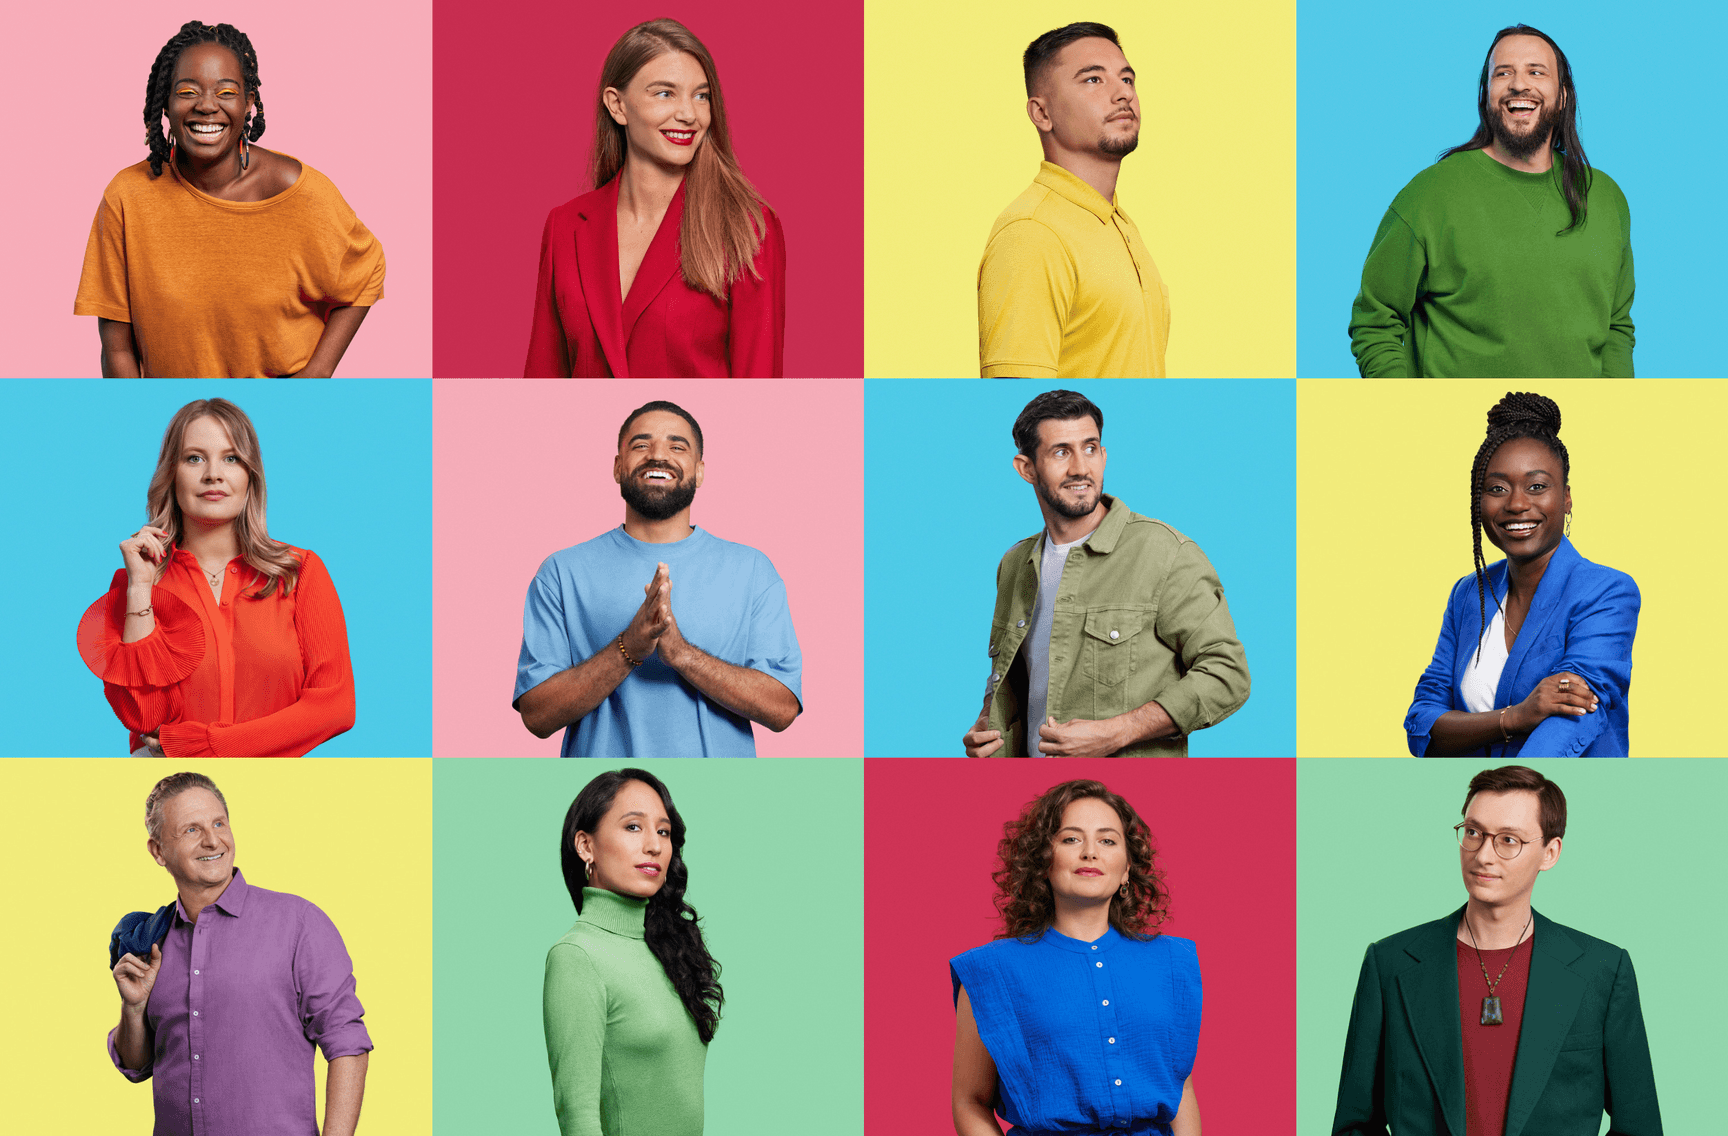 Swissquote employees on colourful backgrounds